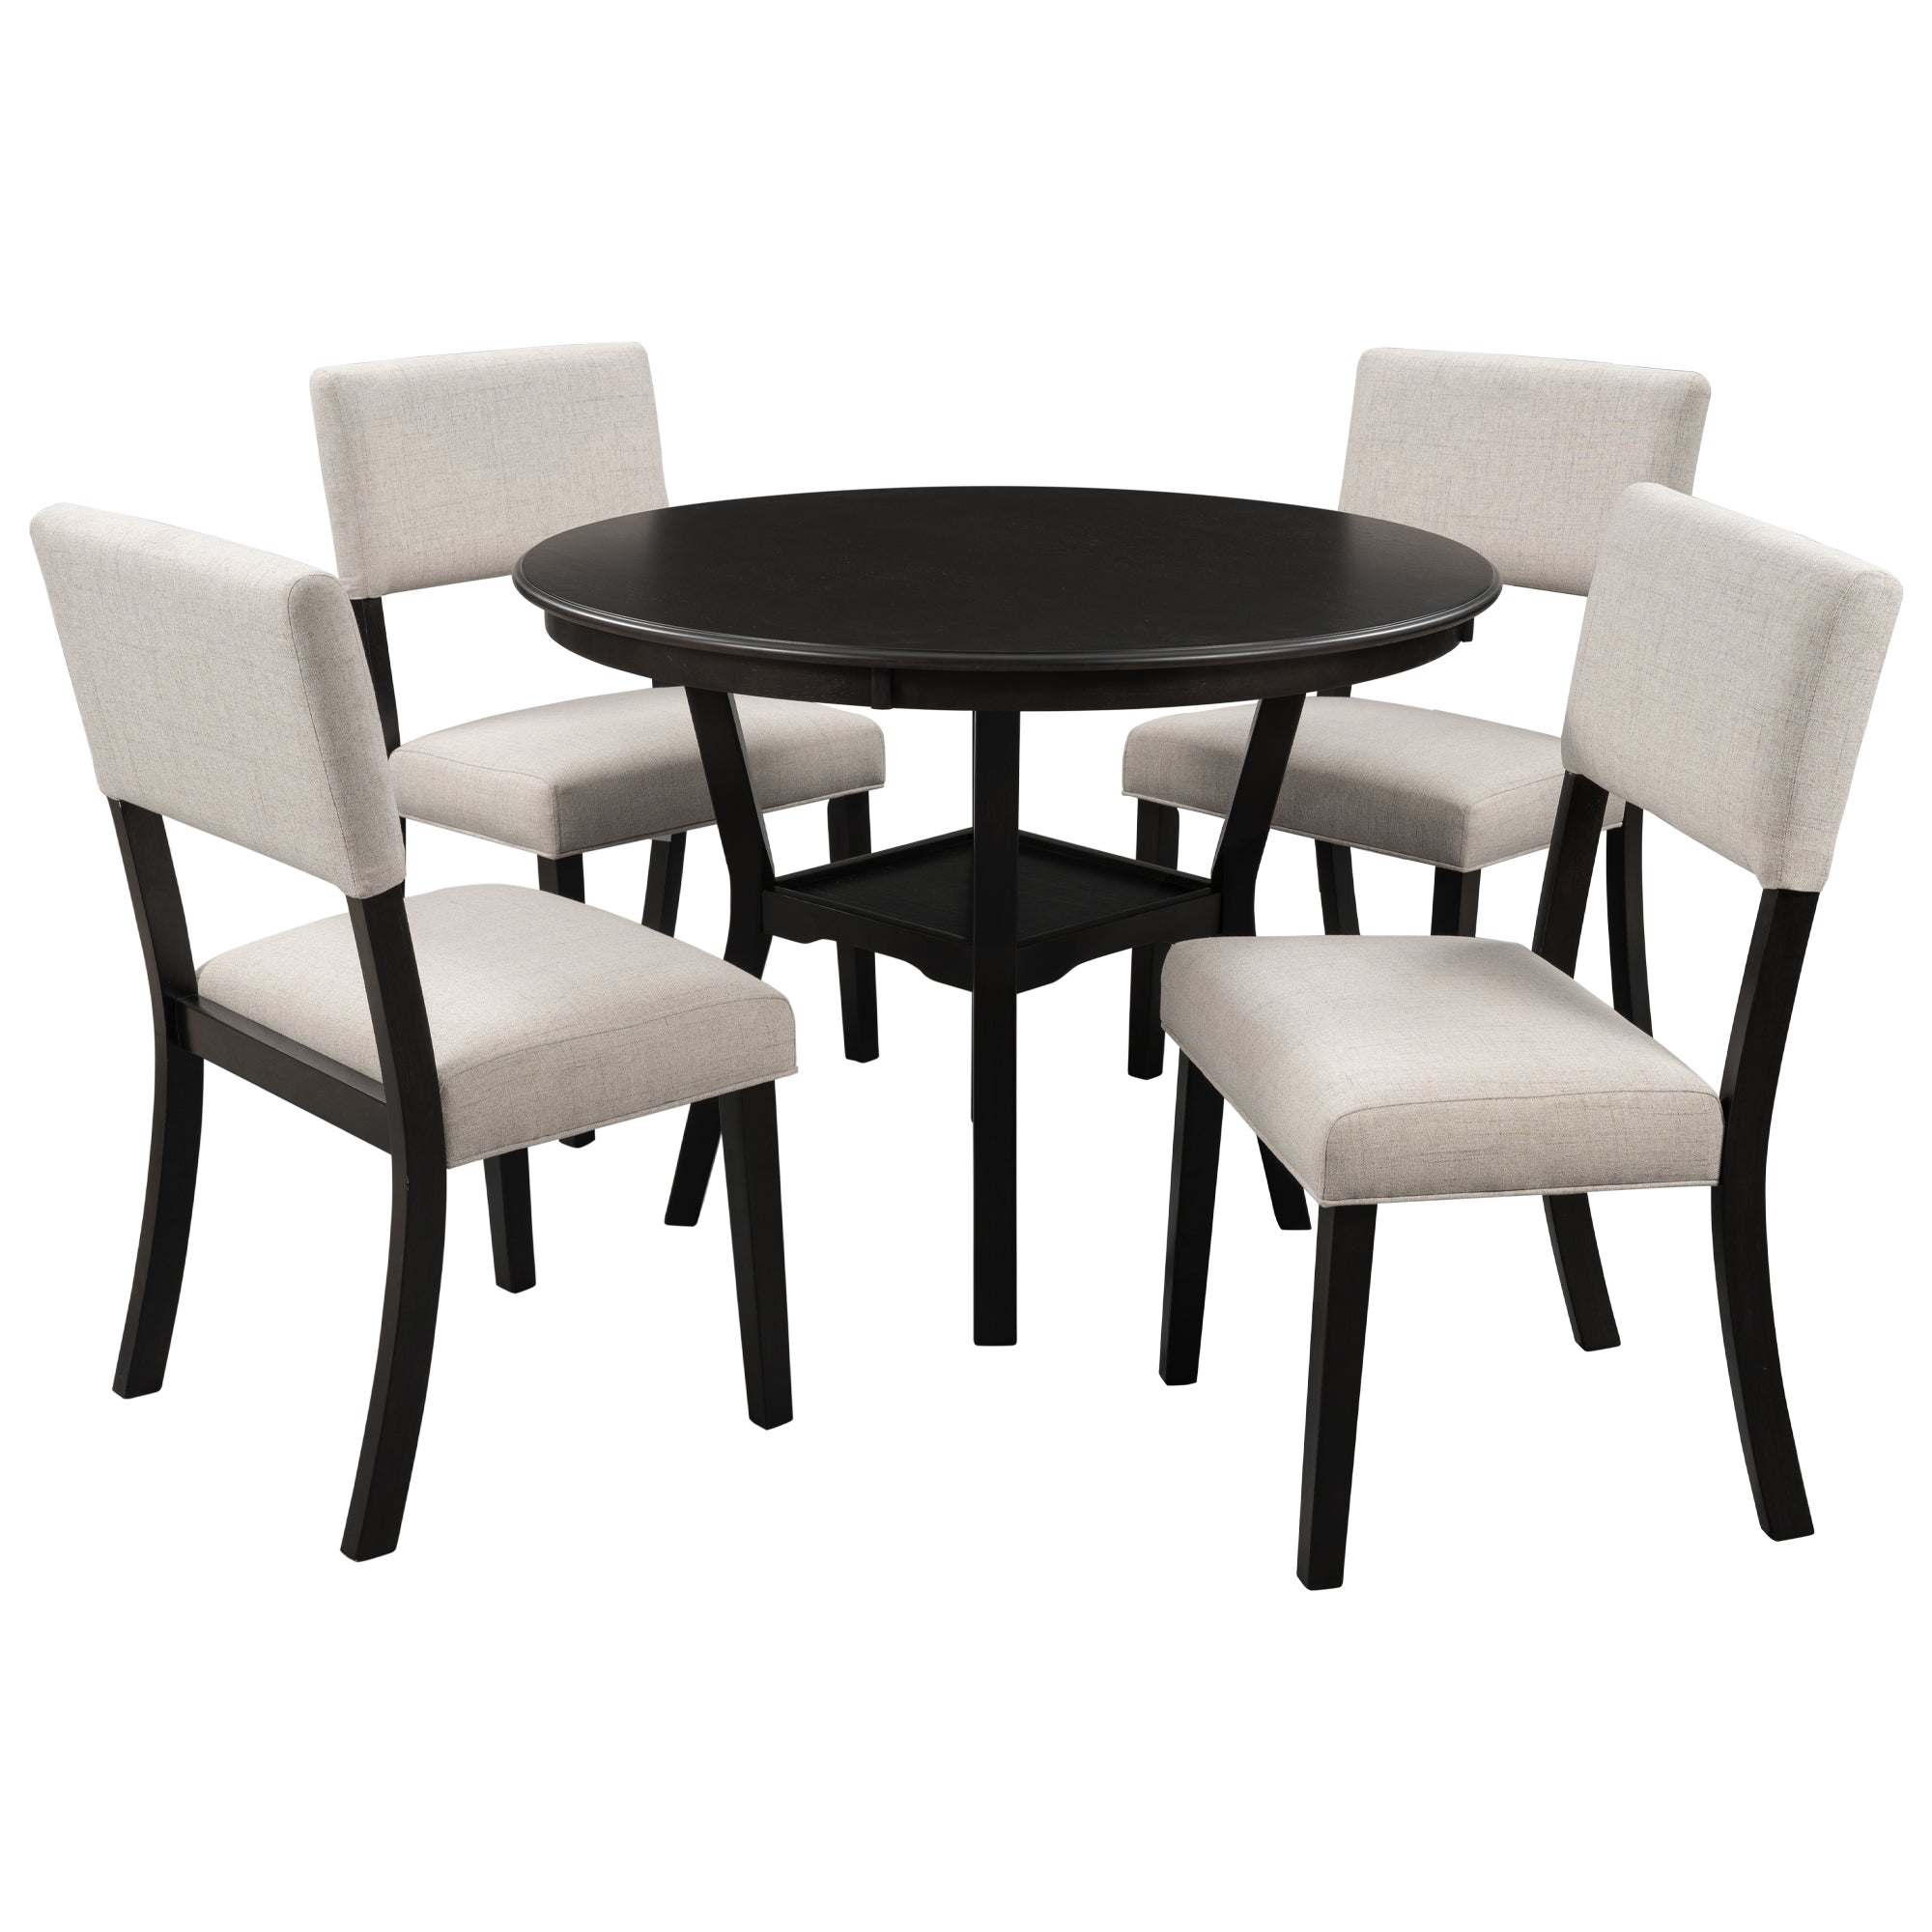 5-Piece Kitchen Dining Table Set Round Table with Bottom Shelf, 4 Upholstered Chairs for Dining Room（Espresso）-Boyel Living